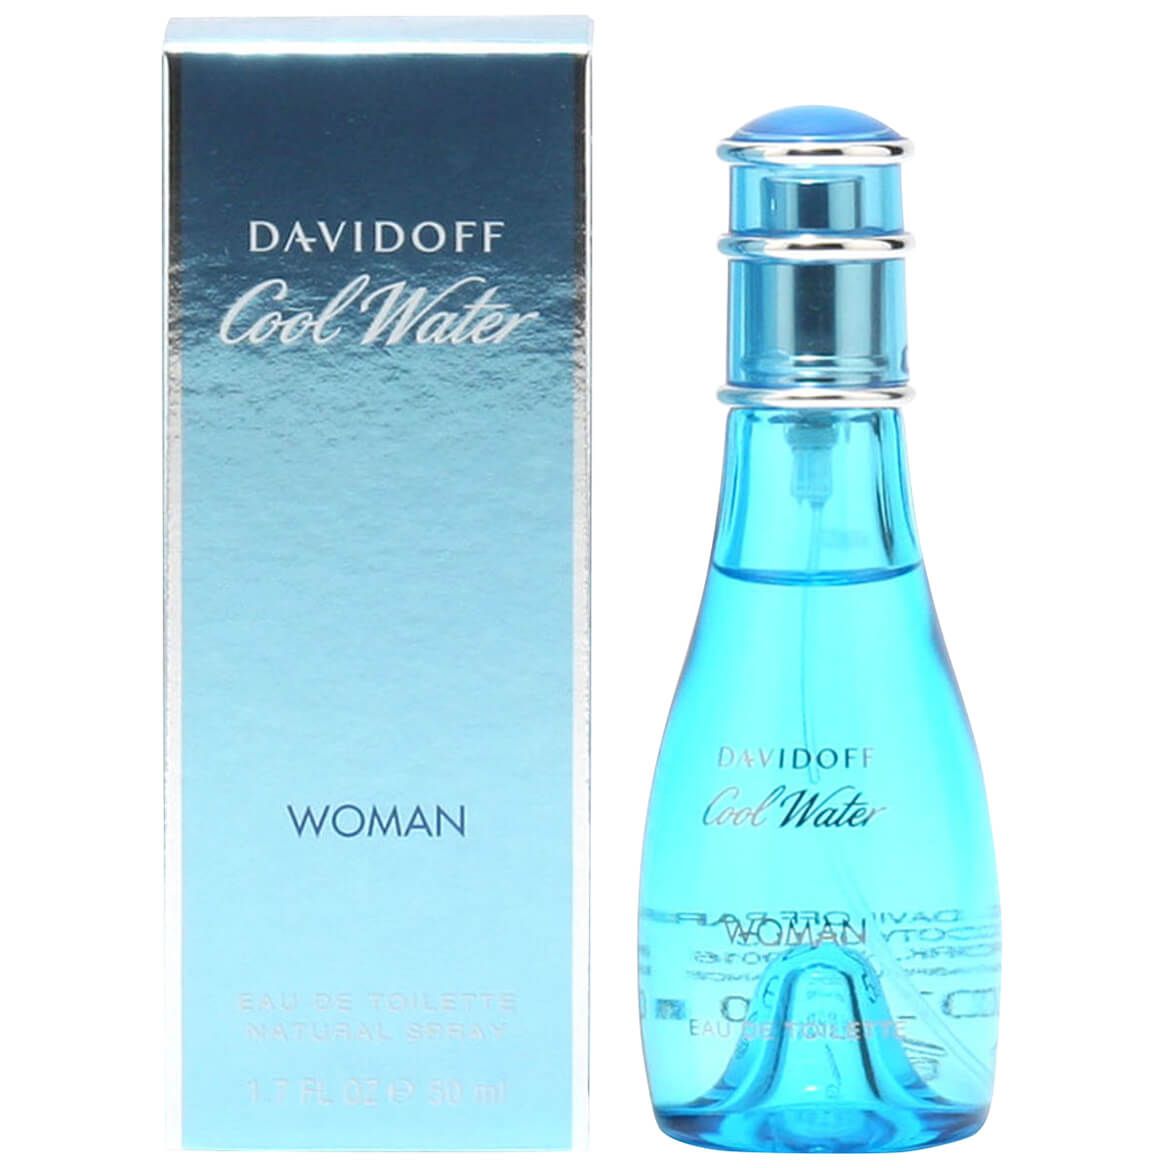 Cool Water Woman by Davidoff EDT Spray + '-' + 350286